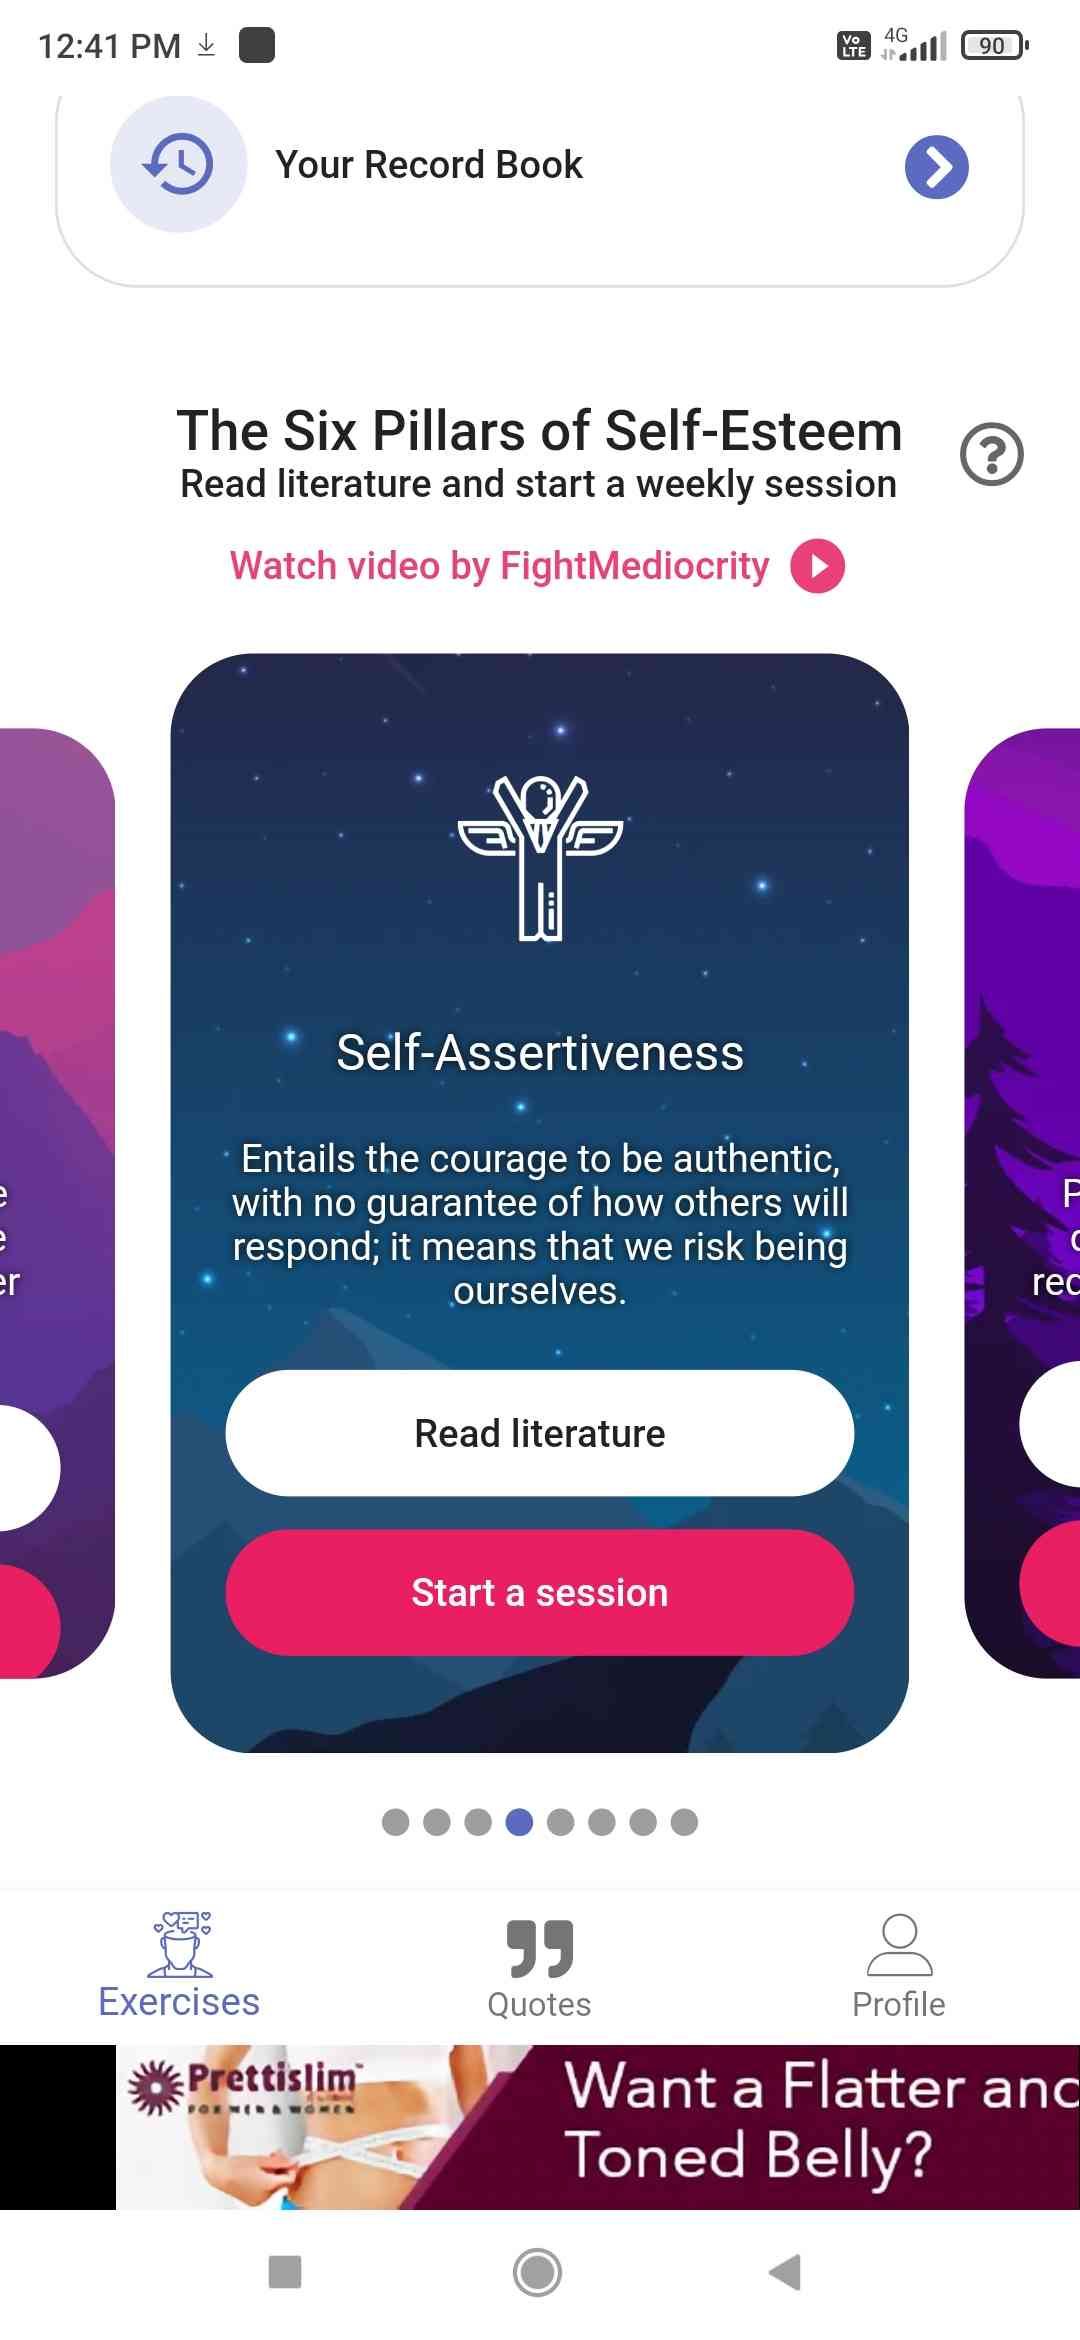 Dr. Nathaniel Branden's iconic book the 6 Pillars of Self Esteem is now available as an app that builds your confidence based on these foundations.